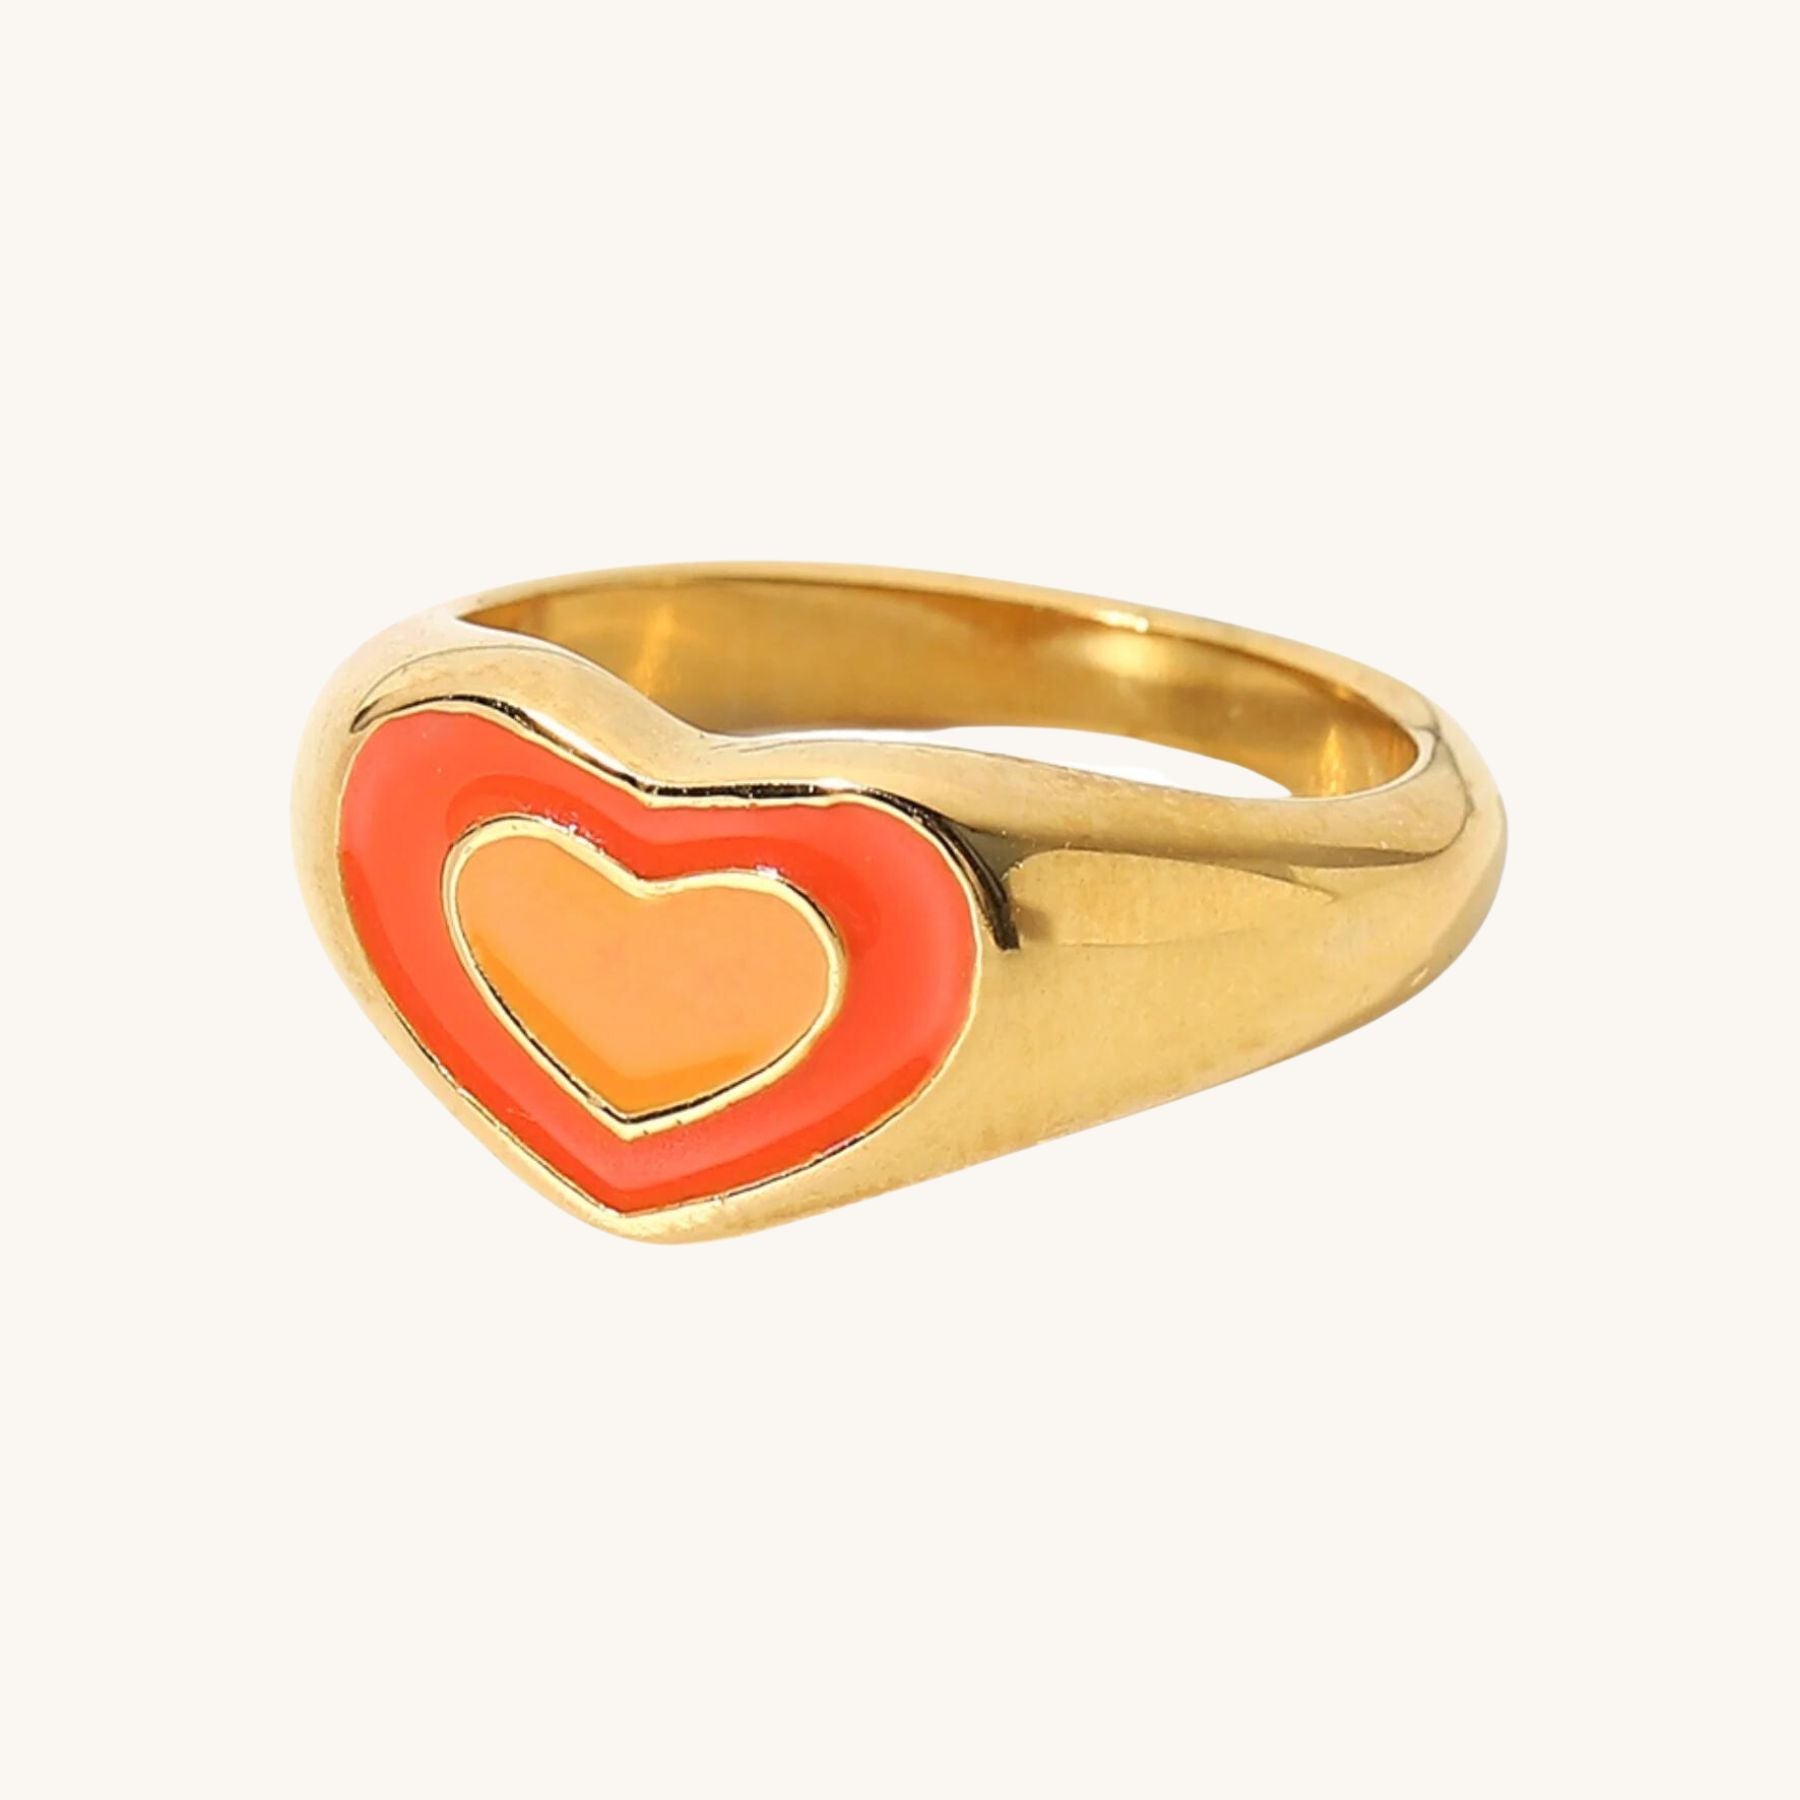 Colourful Heart Ring